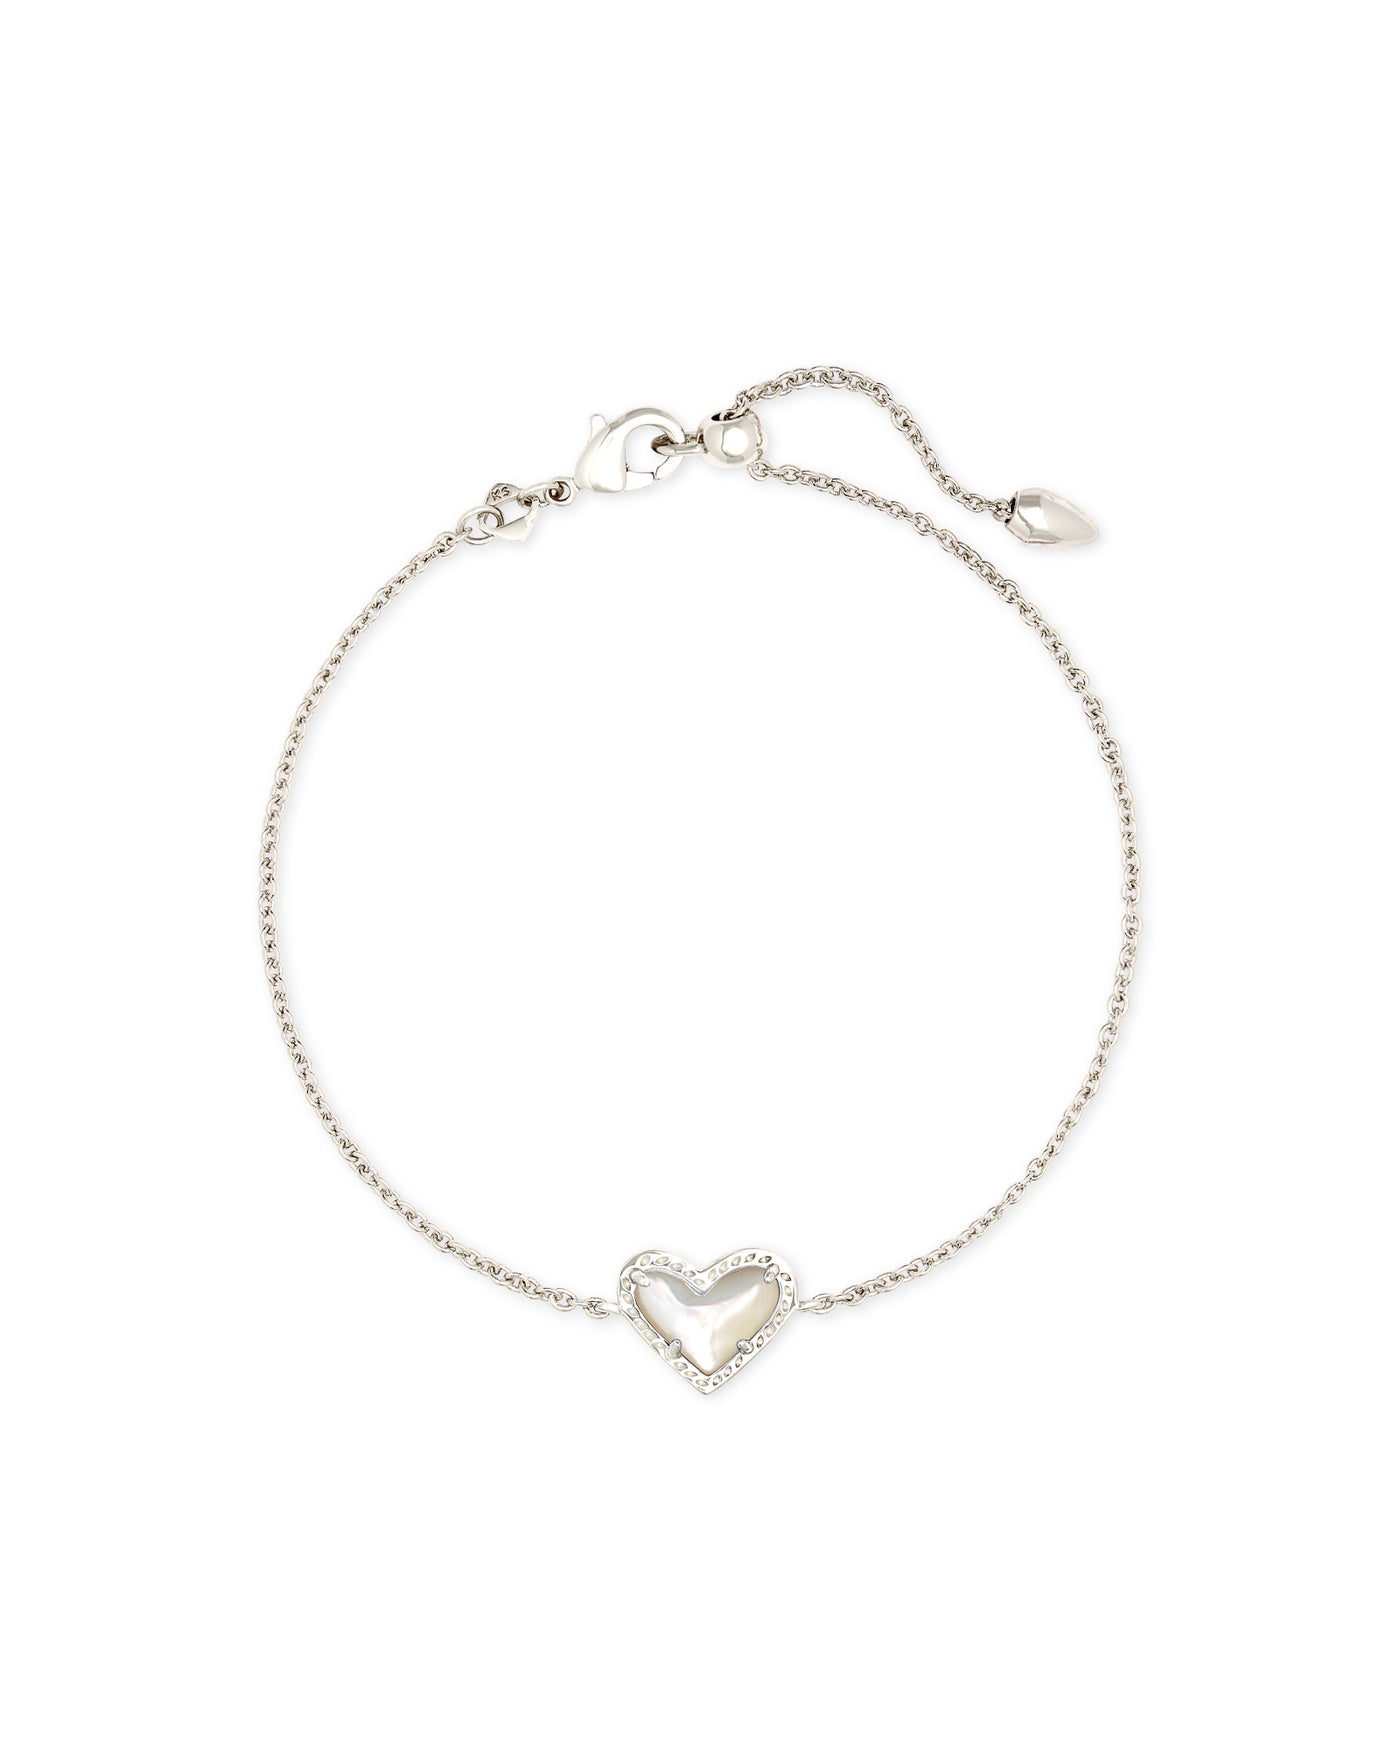 Kendra Scott Ari Heart Delicate Chain Bracelet Silver Ivory Mother of Pearl-Bracelets-Kendra Scott-Market Street Nest, Fashionable Clothing, Shoes and Home Décor Located in Mabank, TX